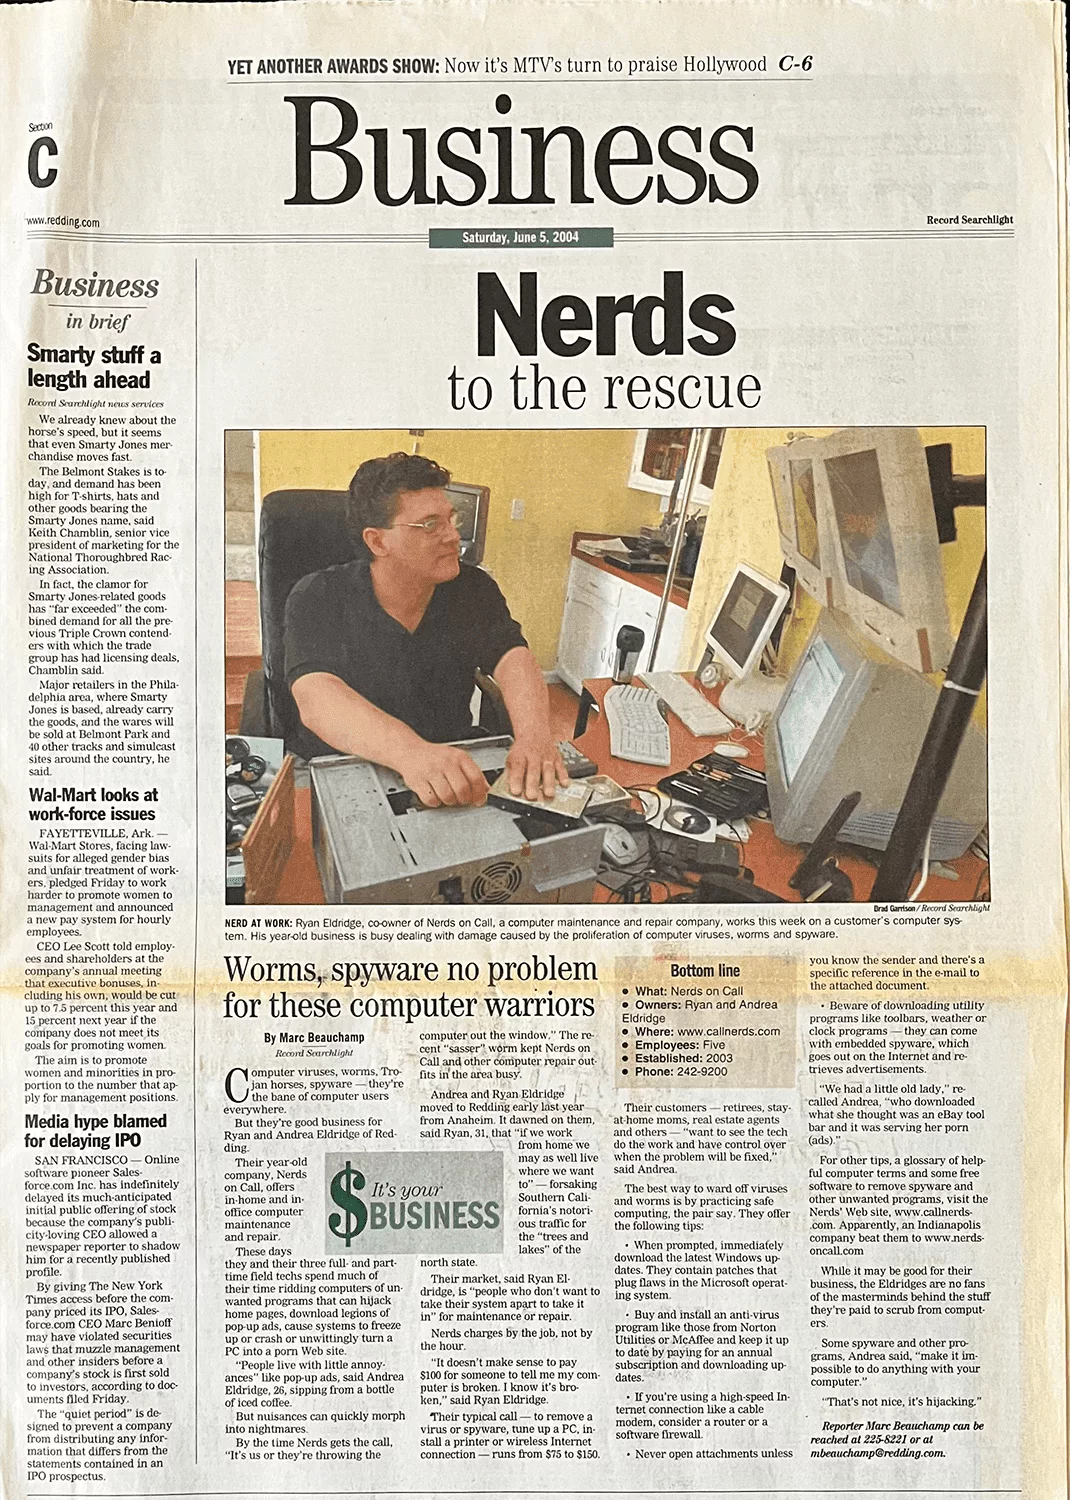 newspaper featuring Nerds On Call